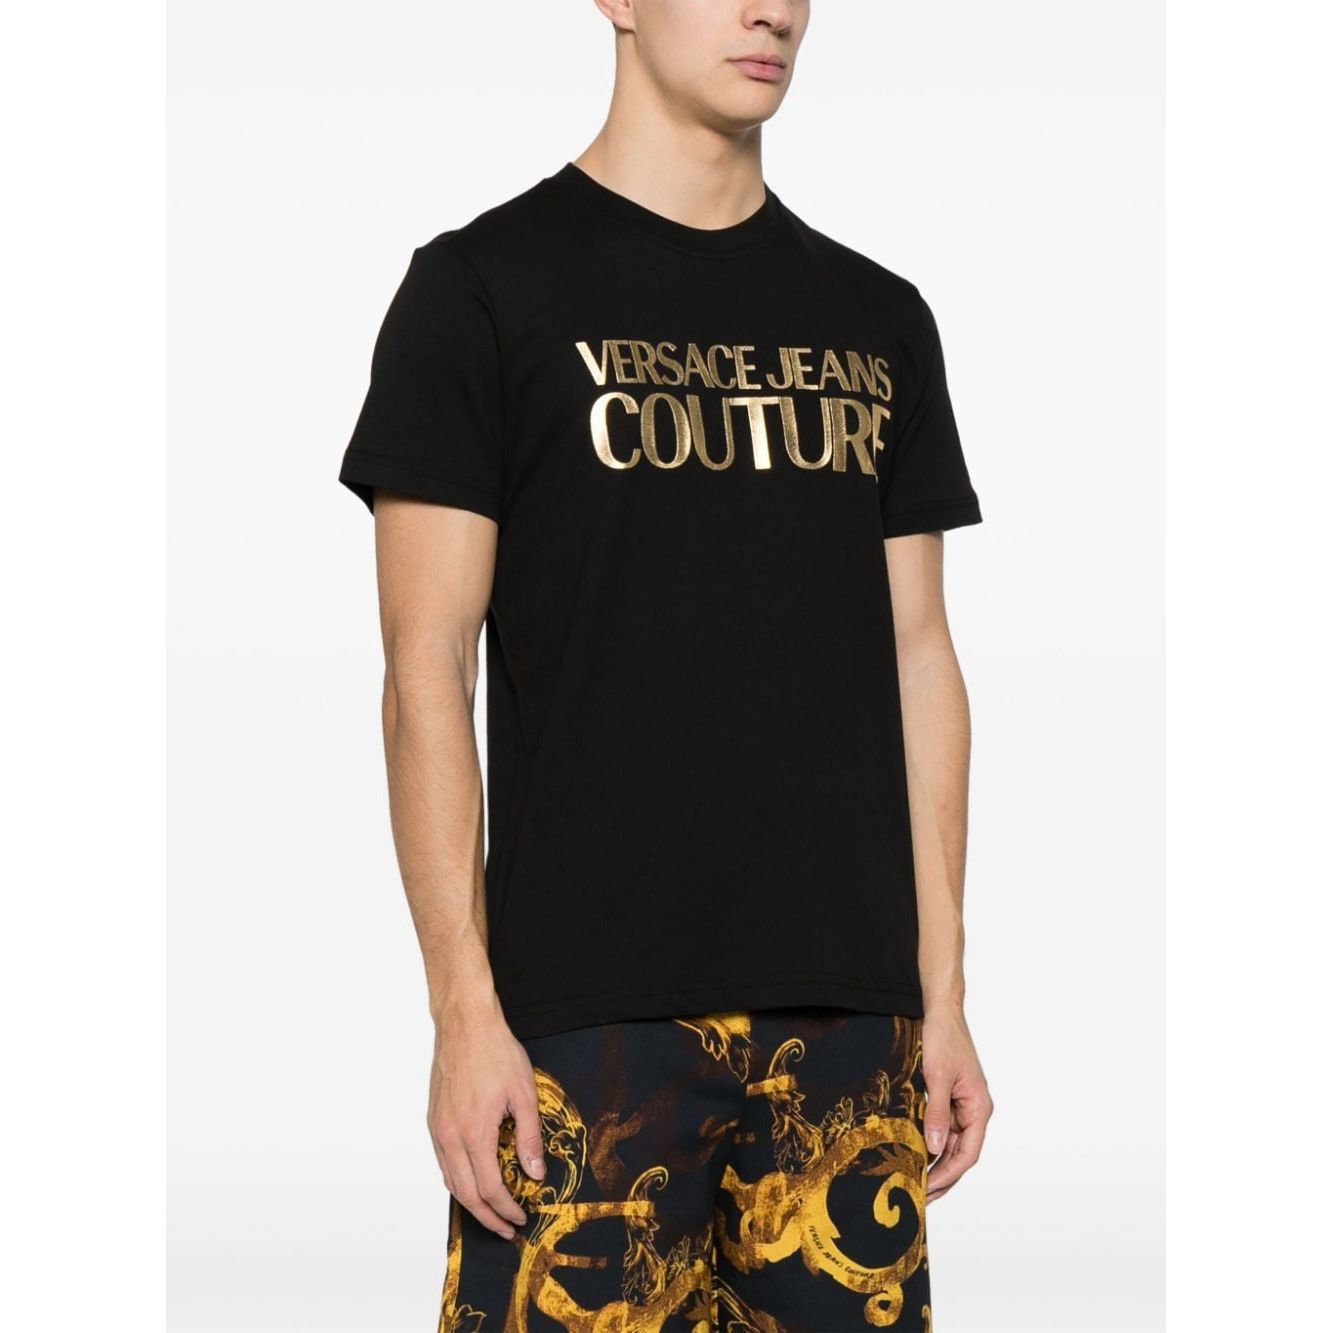 VERSACE JEANS COUTURE SHORT SLEEVE T-SHIRT - Yooto